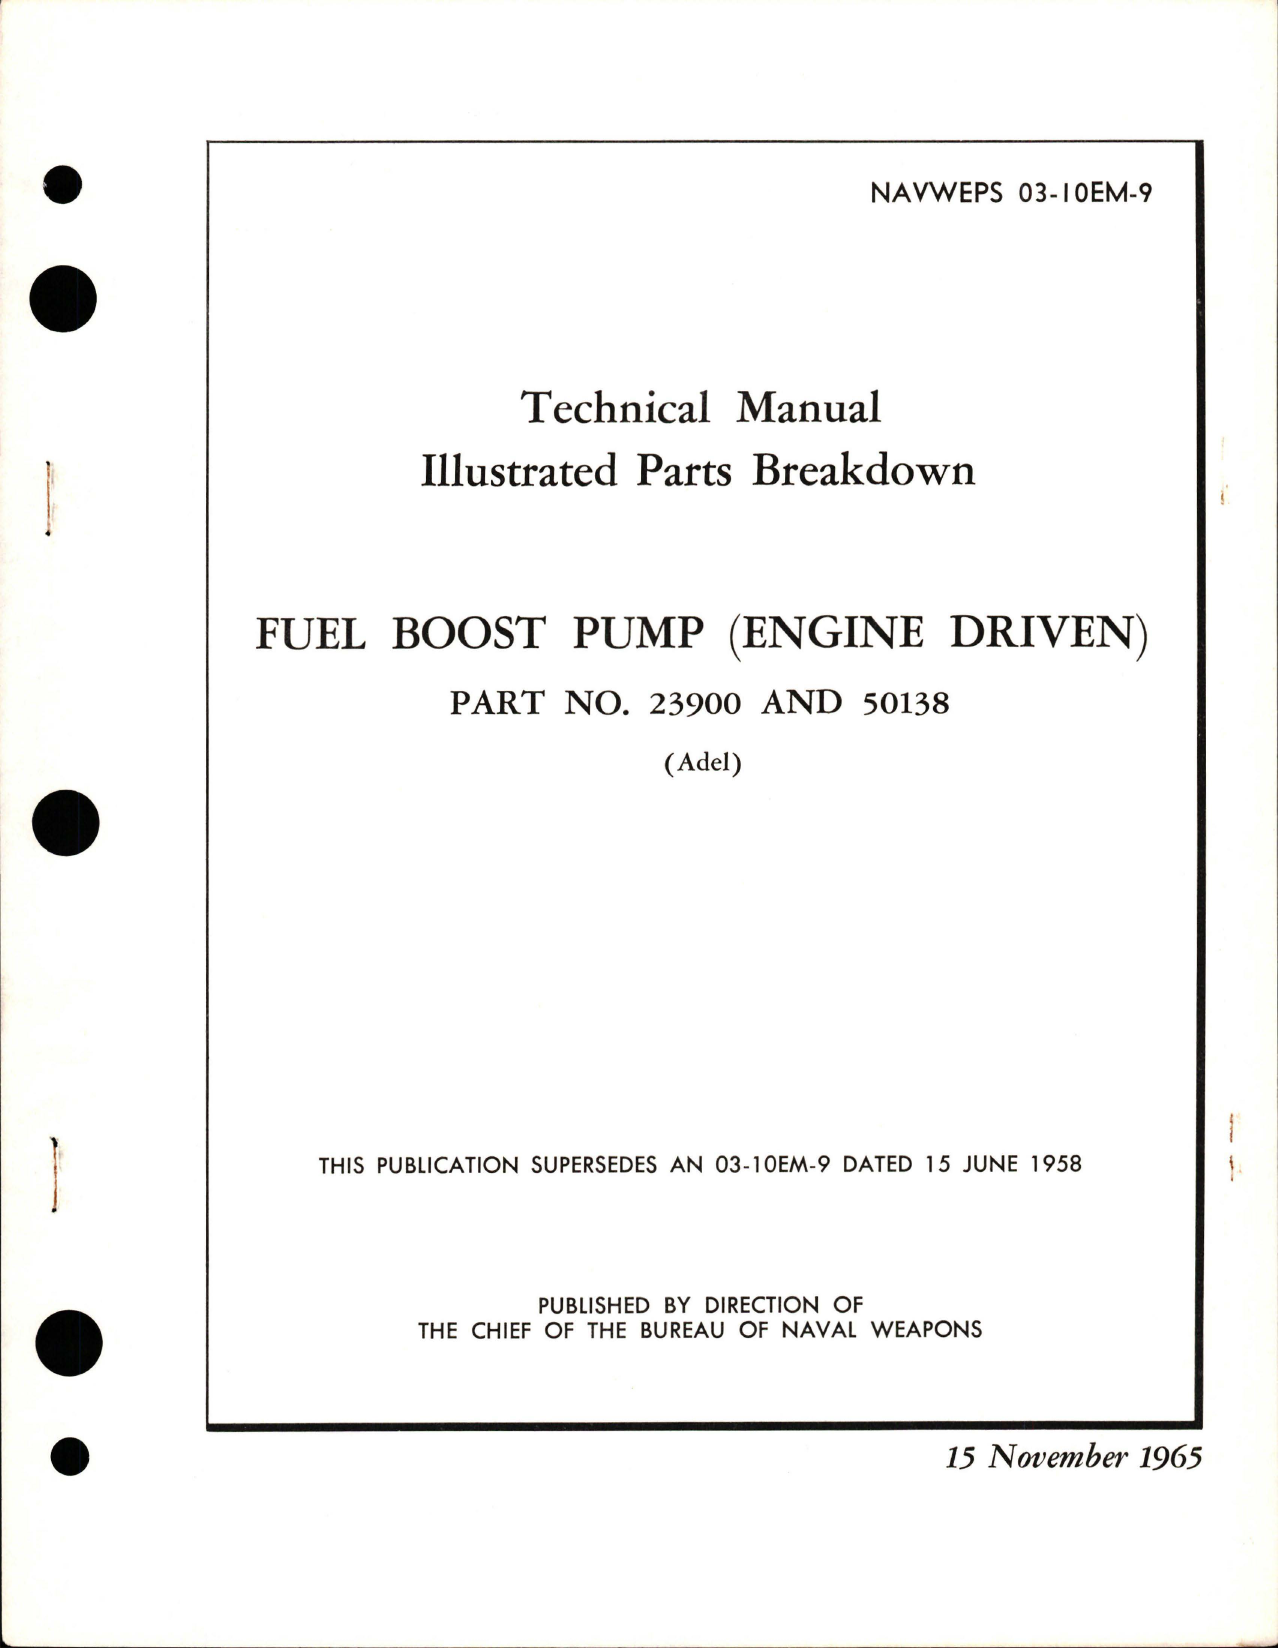 Sample page 1 from AirCorps Library document: Illustrated Parts Breakdown for Engine Driven Fuel Boost Pump - Parts 23900 and 50138